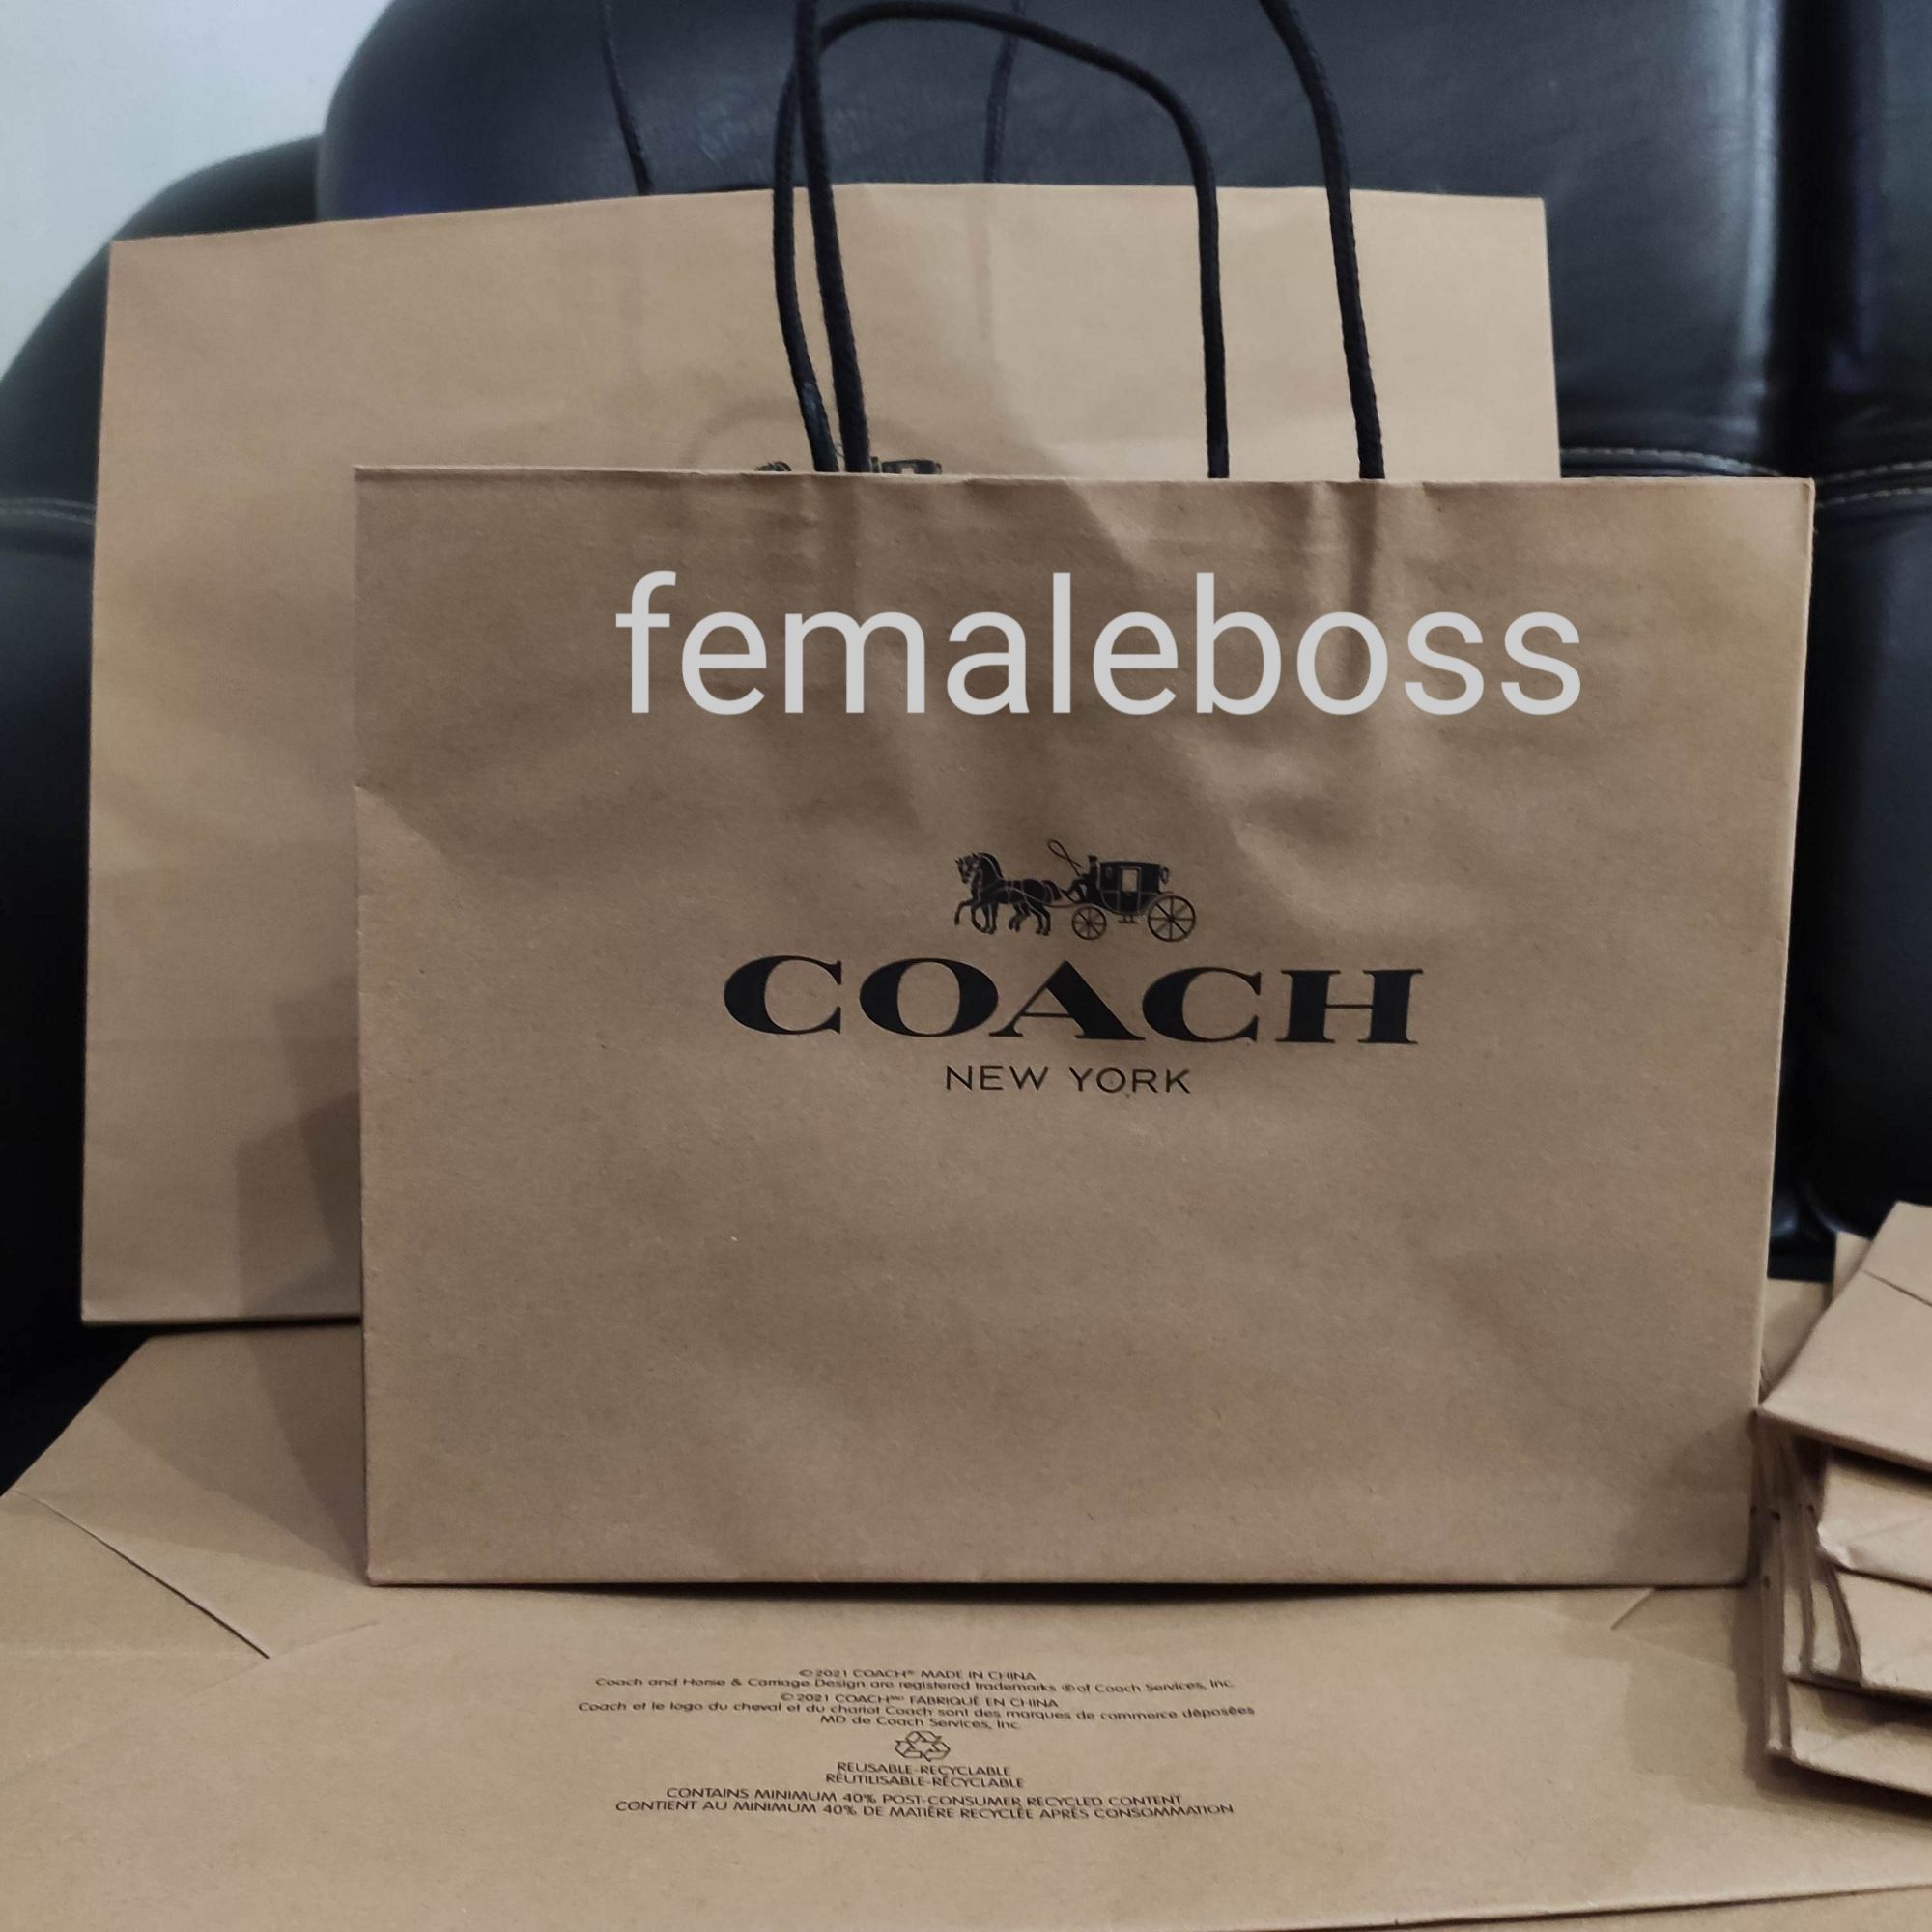 Coach Outlet deals: Save up to 70% on bestselling handbags, totes, wallets  for fall - mlive.com